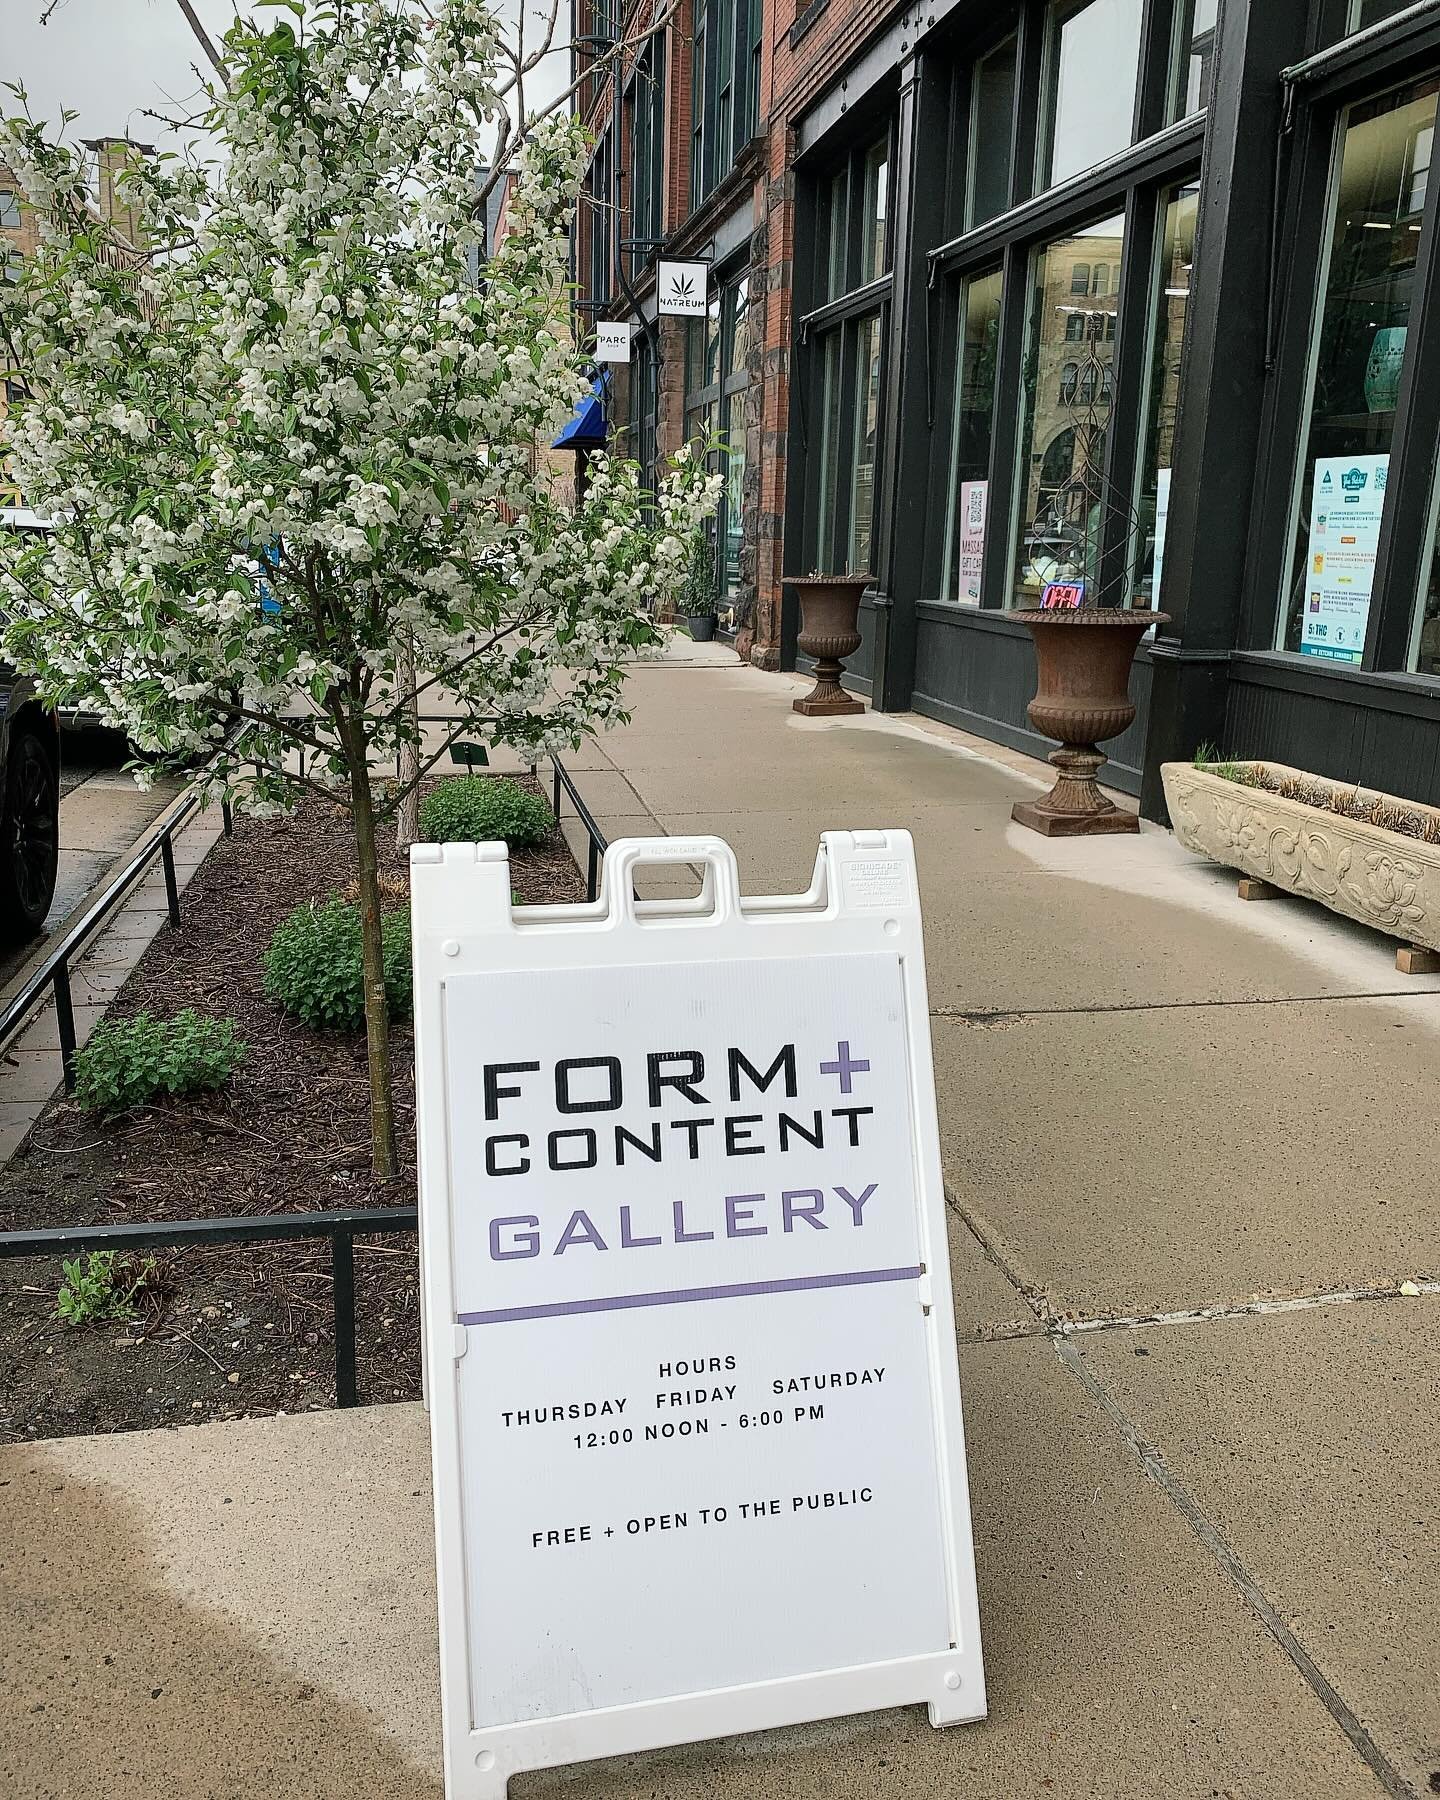 It must be spring! 

Looking forward to seeing you this weekend at the gallery Thursday, Friday, Saturday we&rsquo;lll be here 12-6pm. Come say hi and see the fabulous show that is up through May 18!

What Fierce Looks Like: The Artists of the Women&